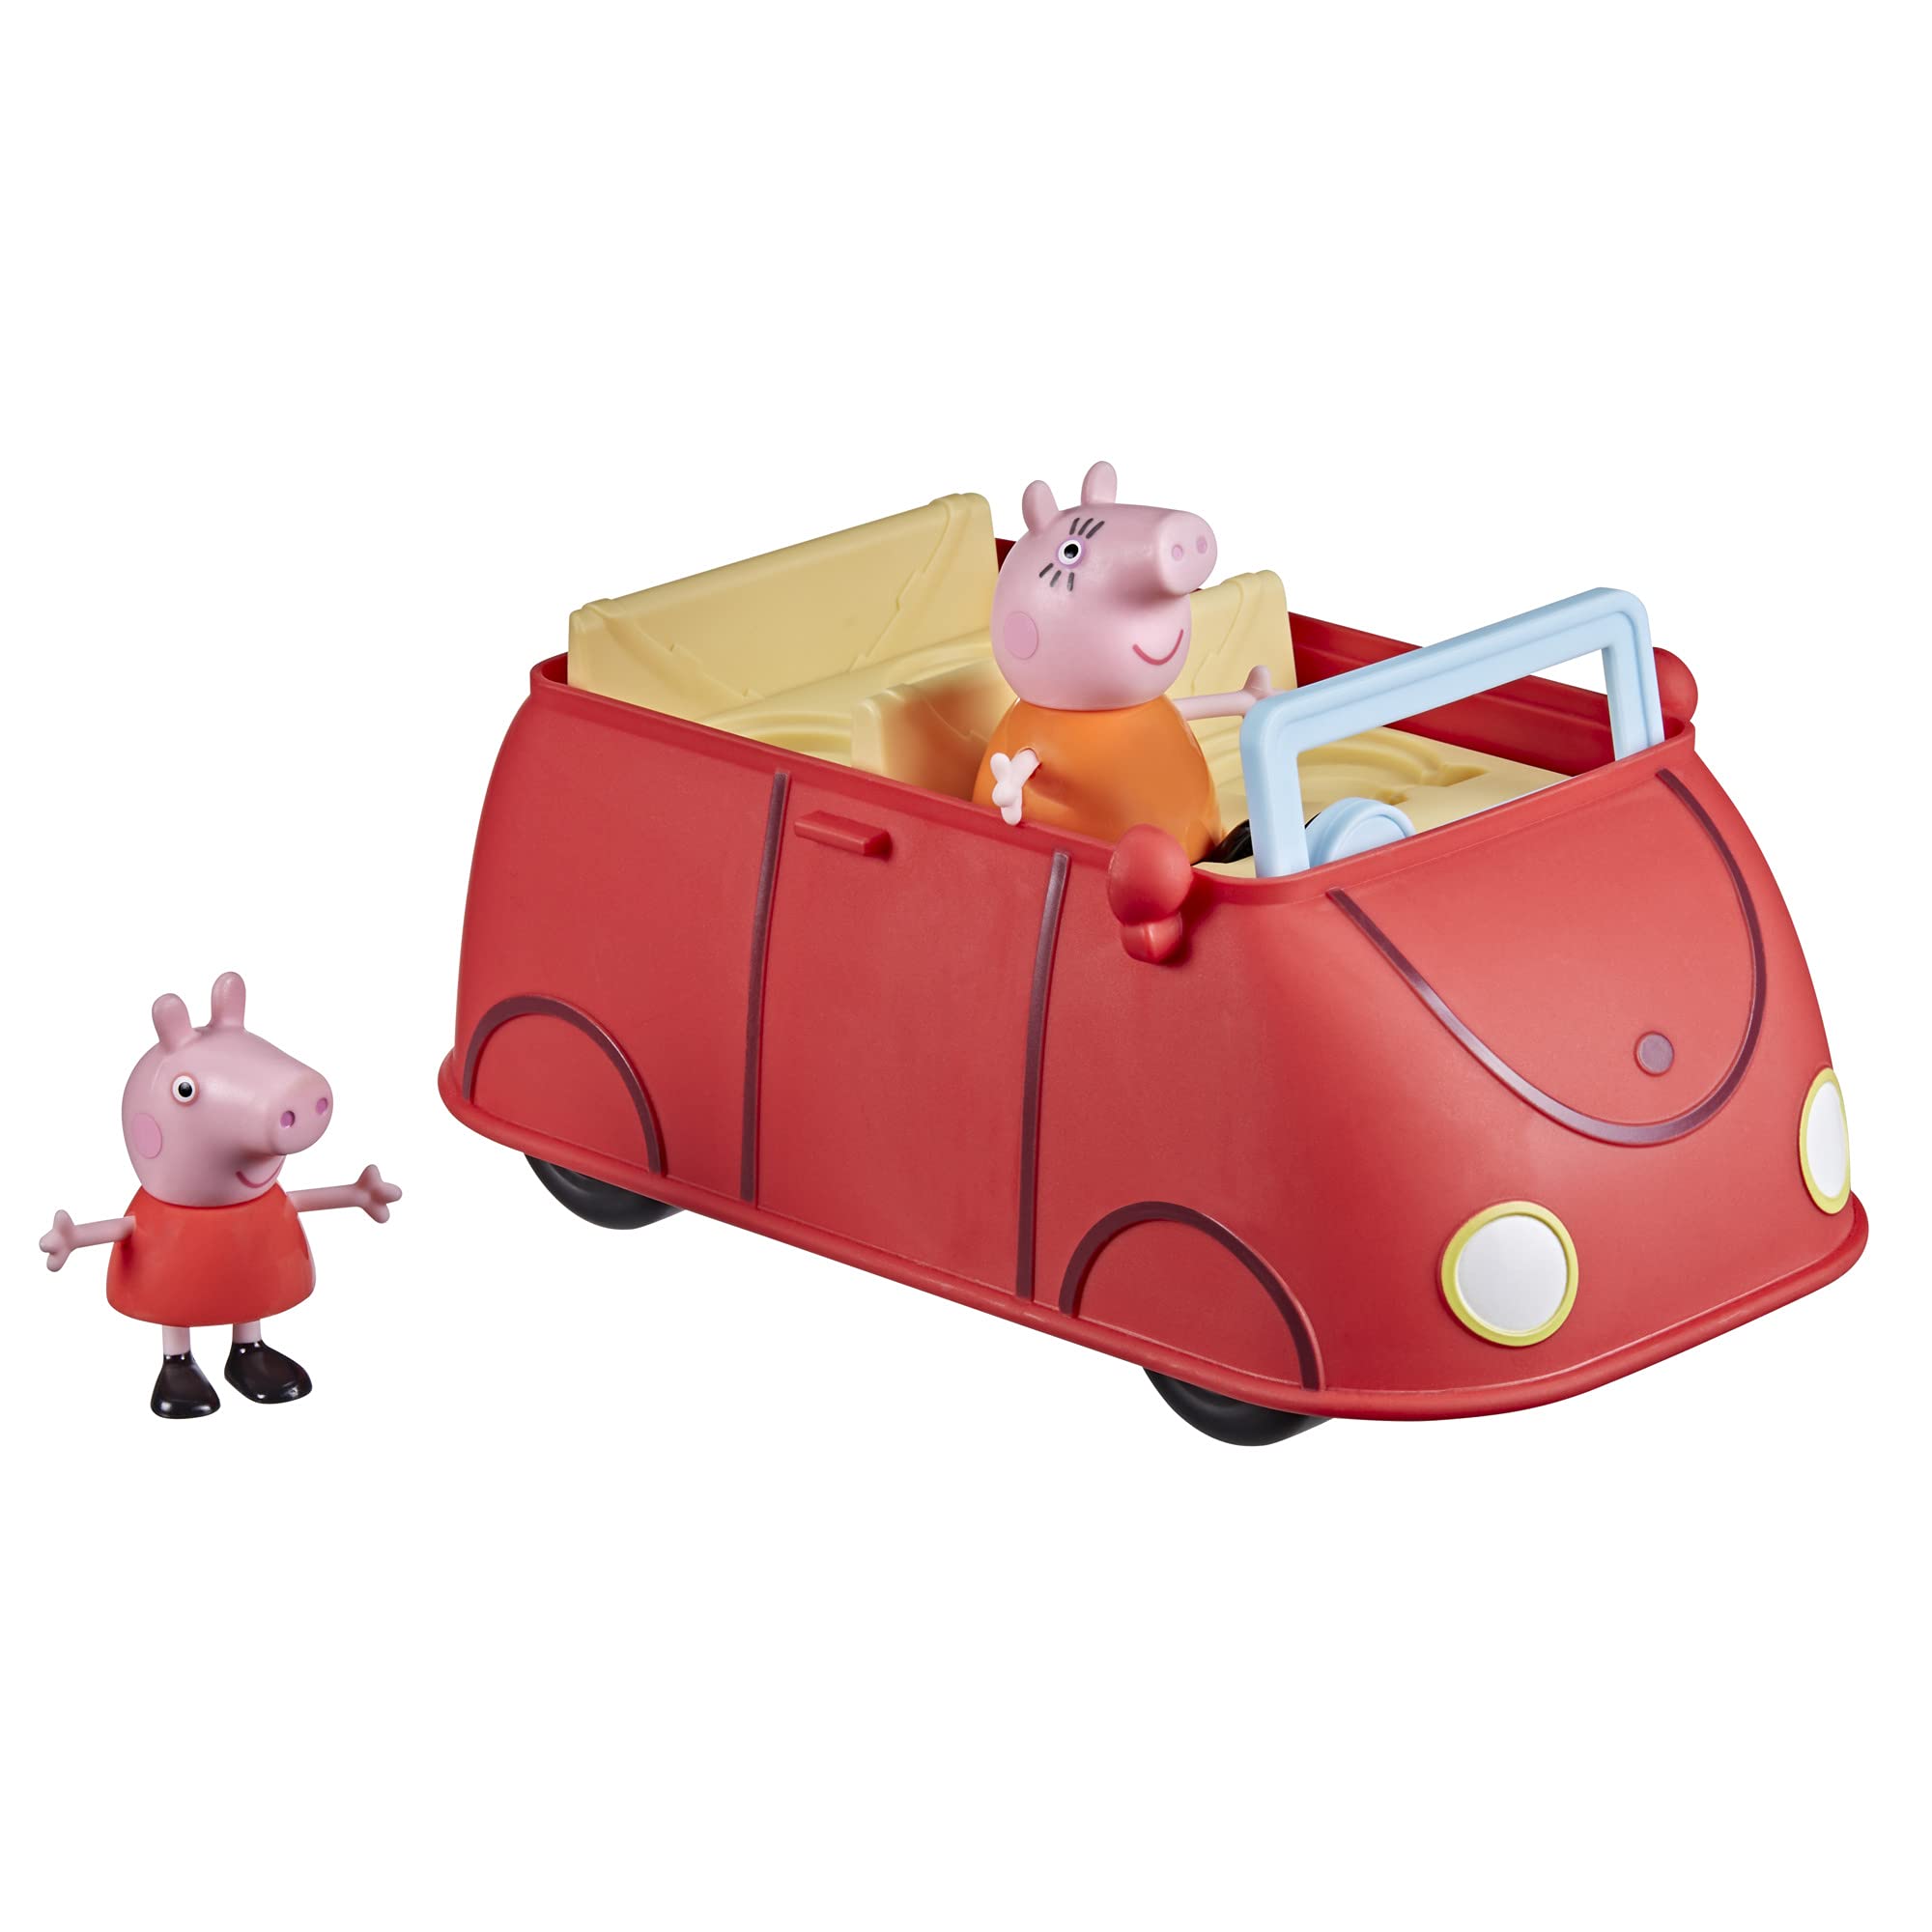 Peppa Pig Peppa’s Adventures Peppa’s Family Red Car Preschool Toy, Speech and Sound Effects, Includes 2 Figures, for Ages 3 and Up